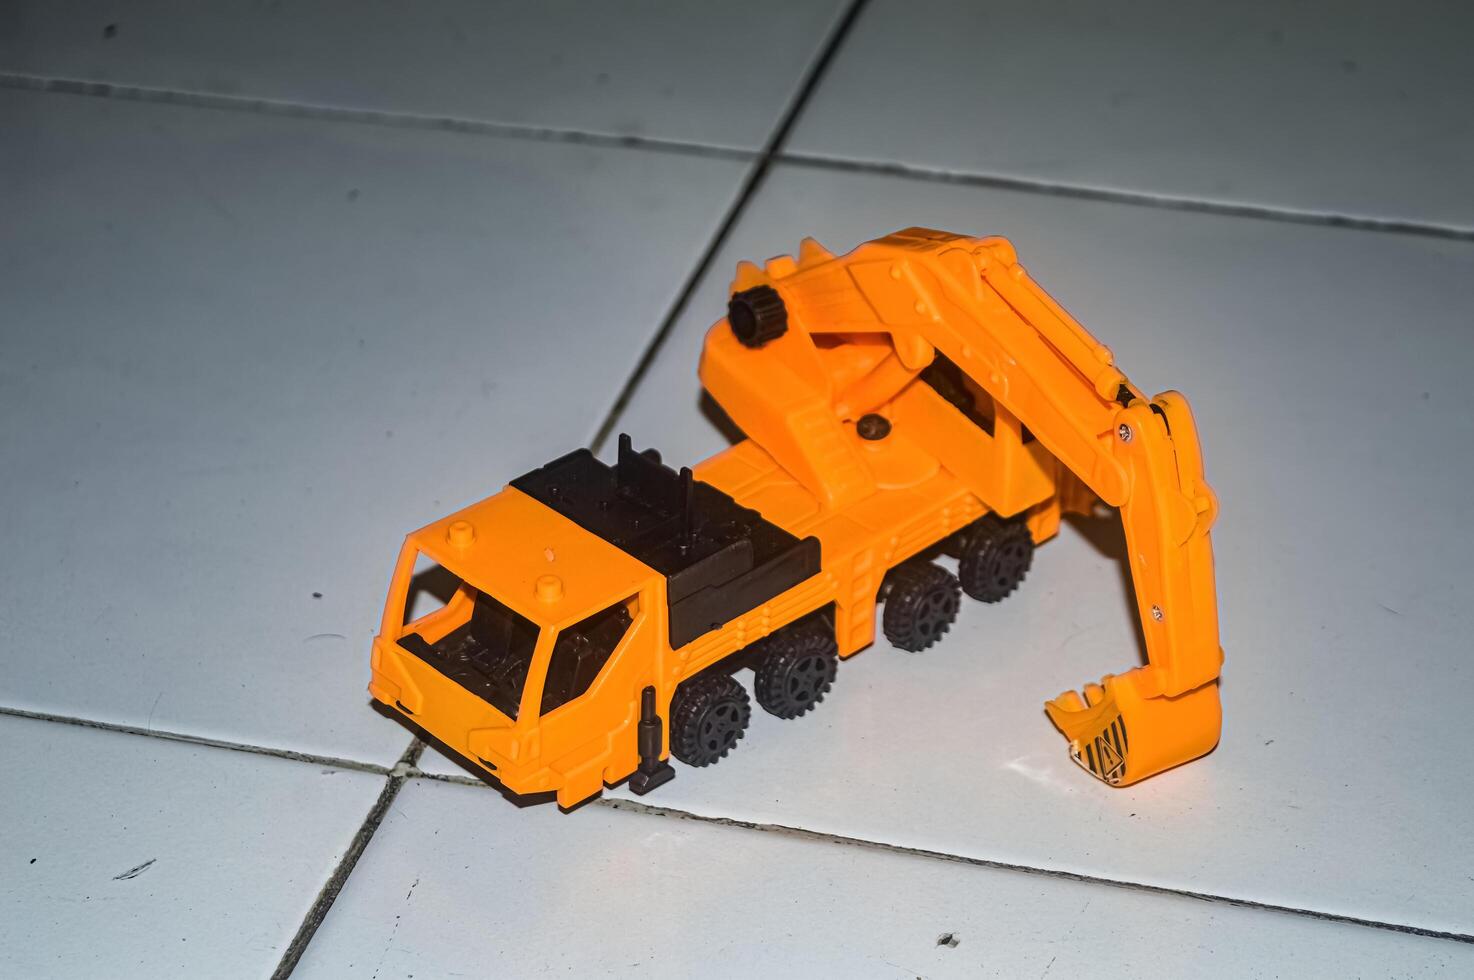 a yellow toy miniature excavator on the floor photo